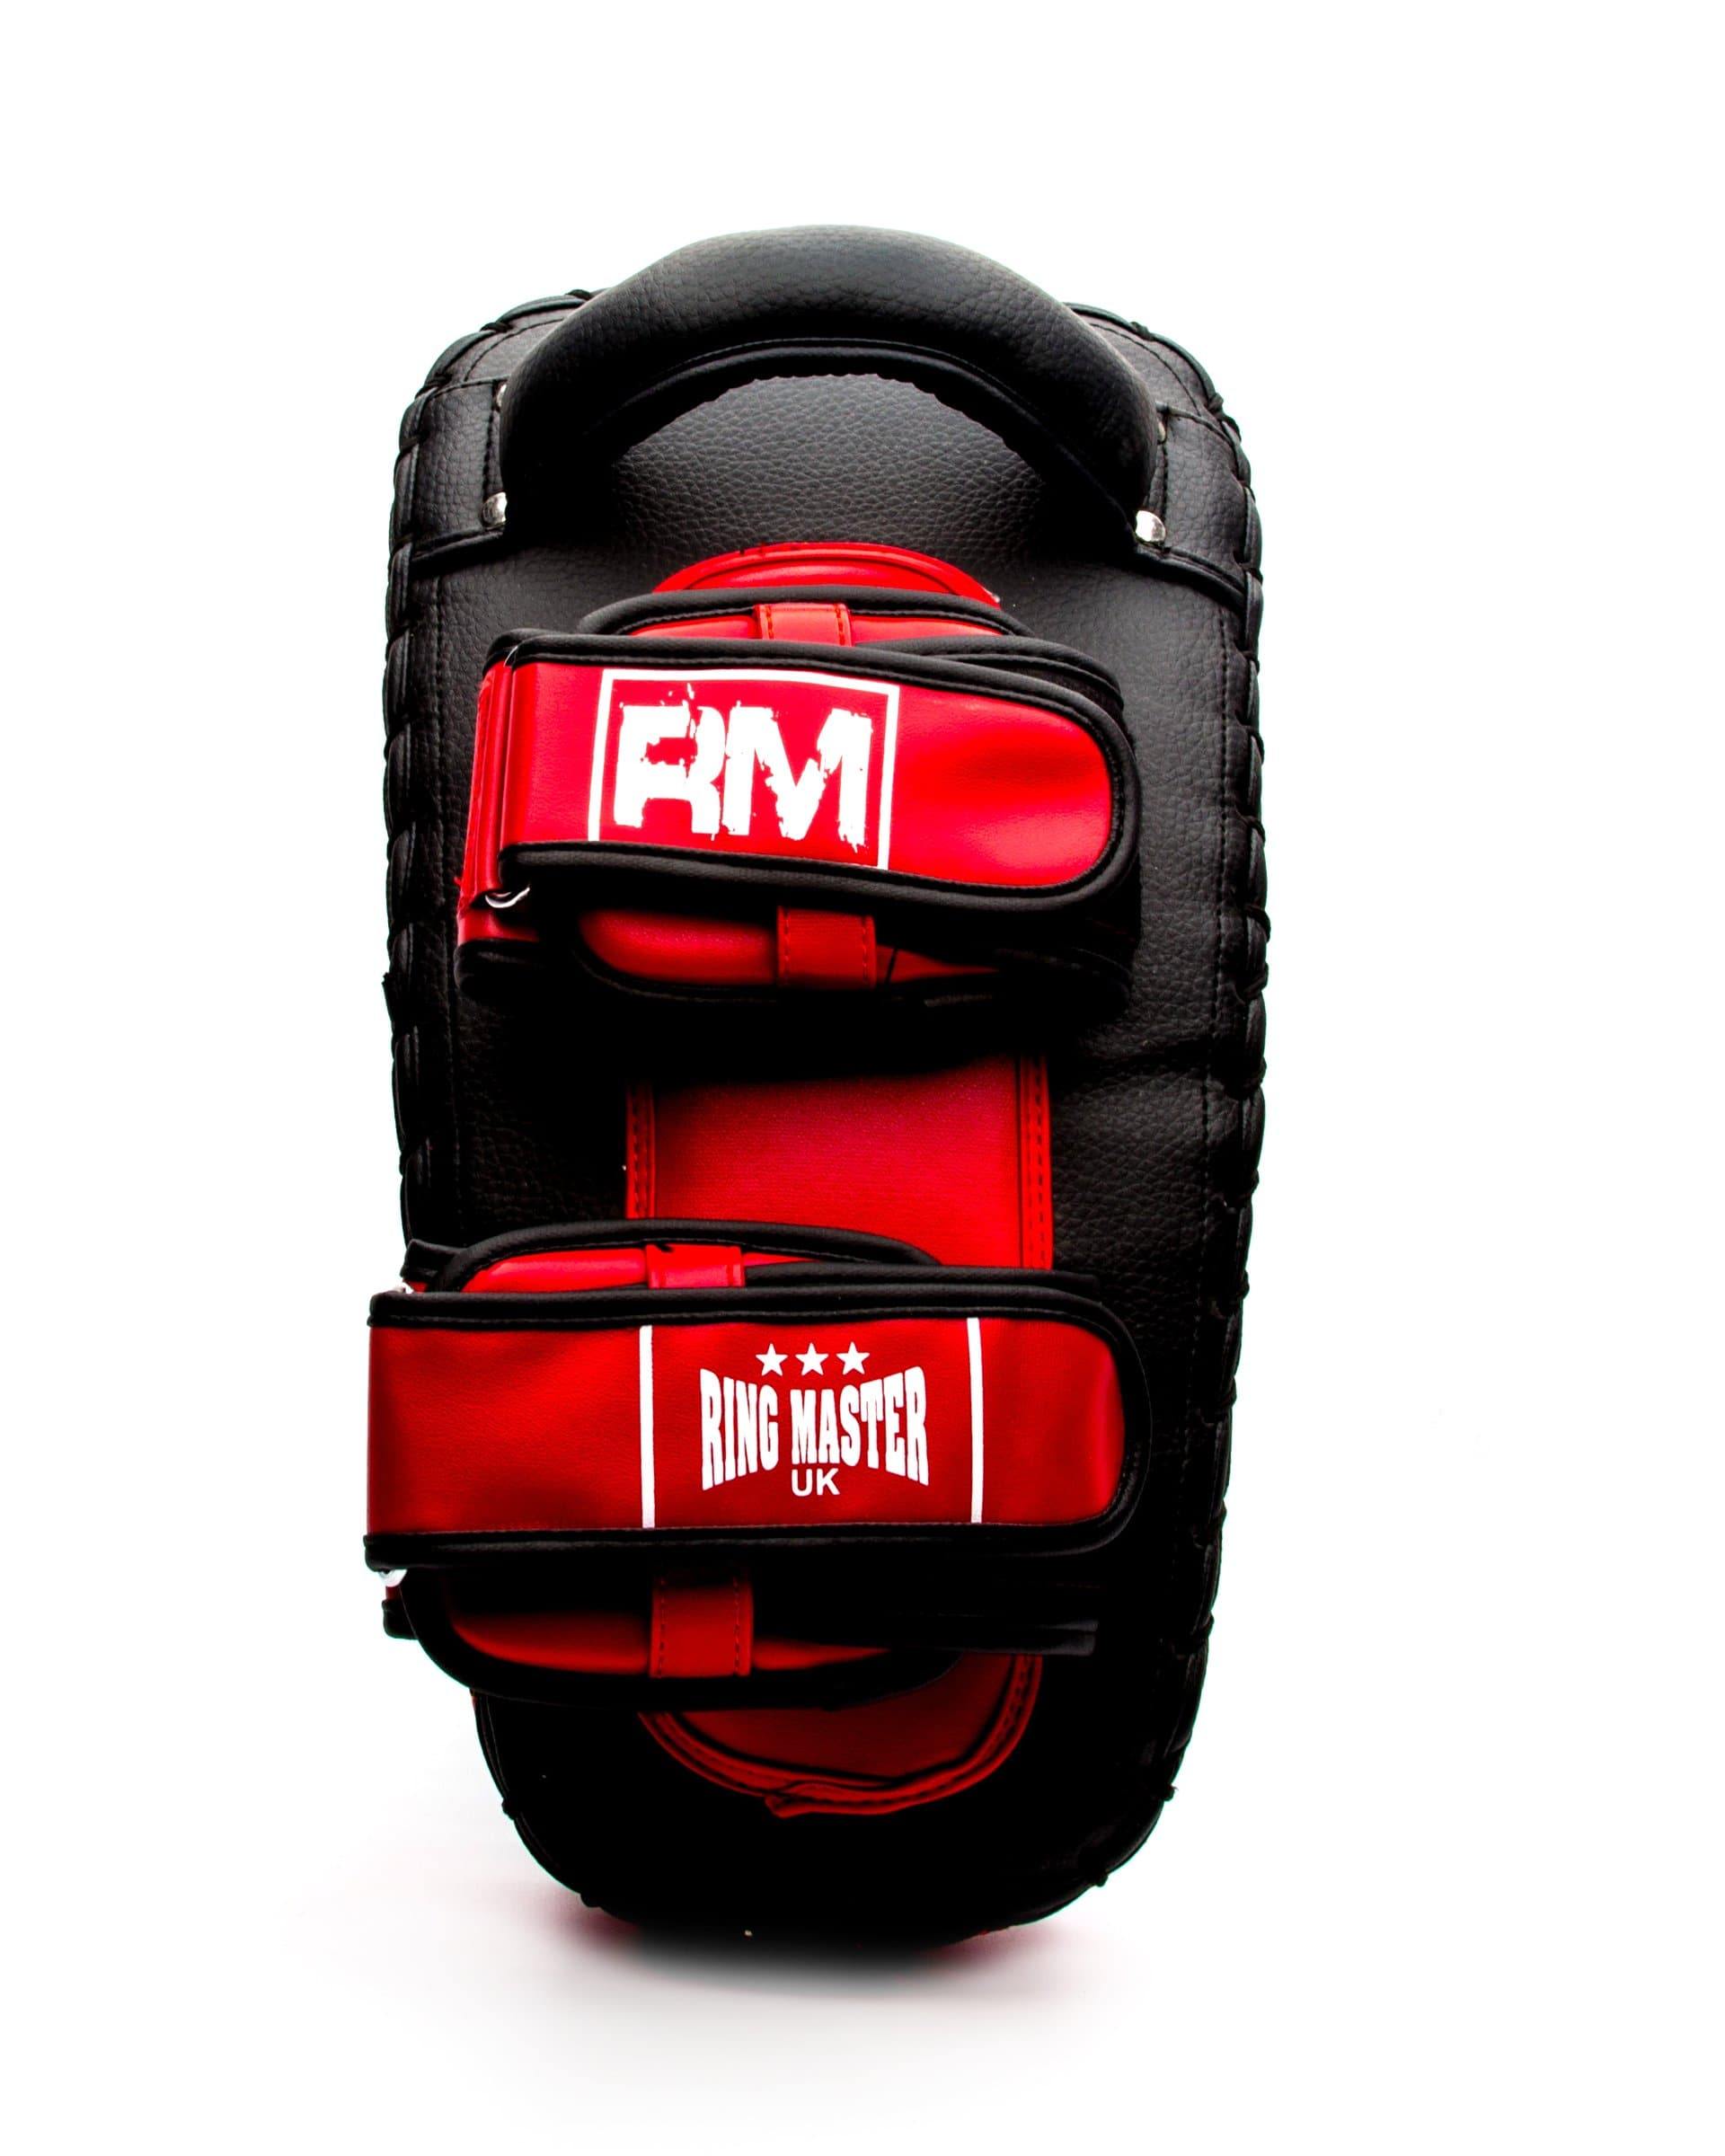 RingMaster Sports One Size Arm Pads Synthetic Leather Black and Red (Single Item) Image 4